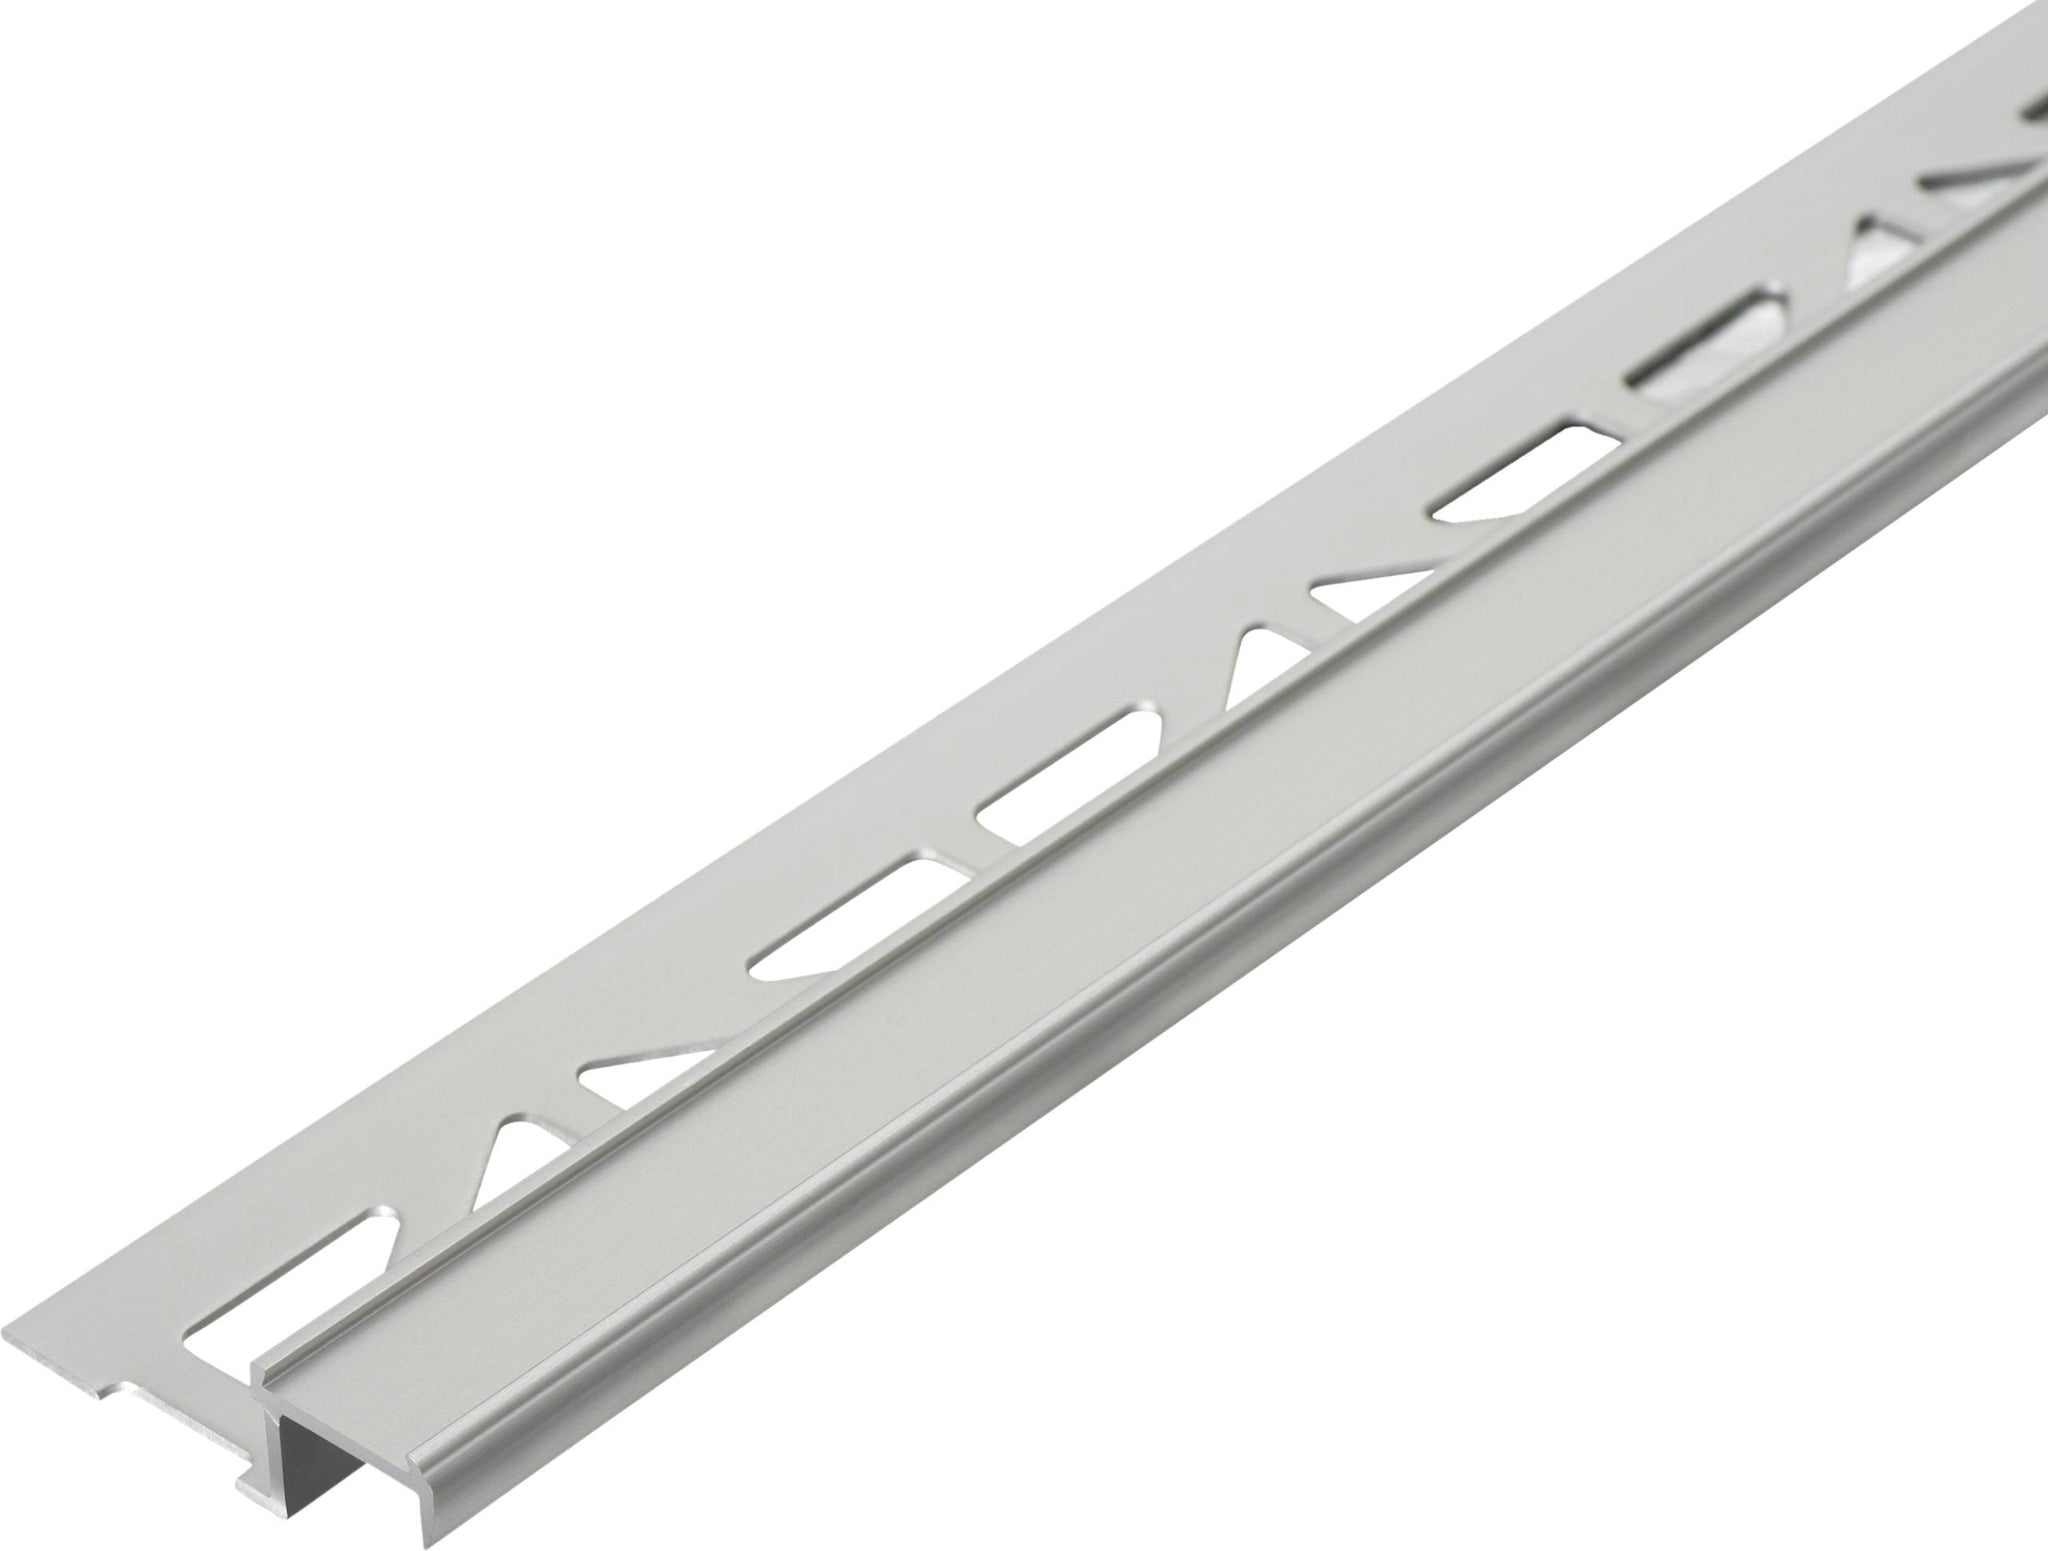 DIAMONDSTEP Stair nosing profile - 11/32 in. H x 5/8 in. W - Silver - Aluminum - anti slip safety without insert